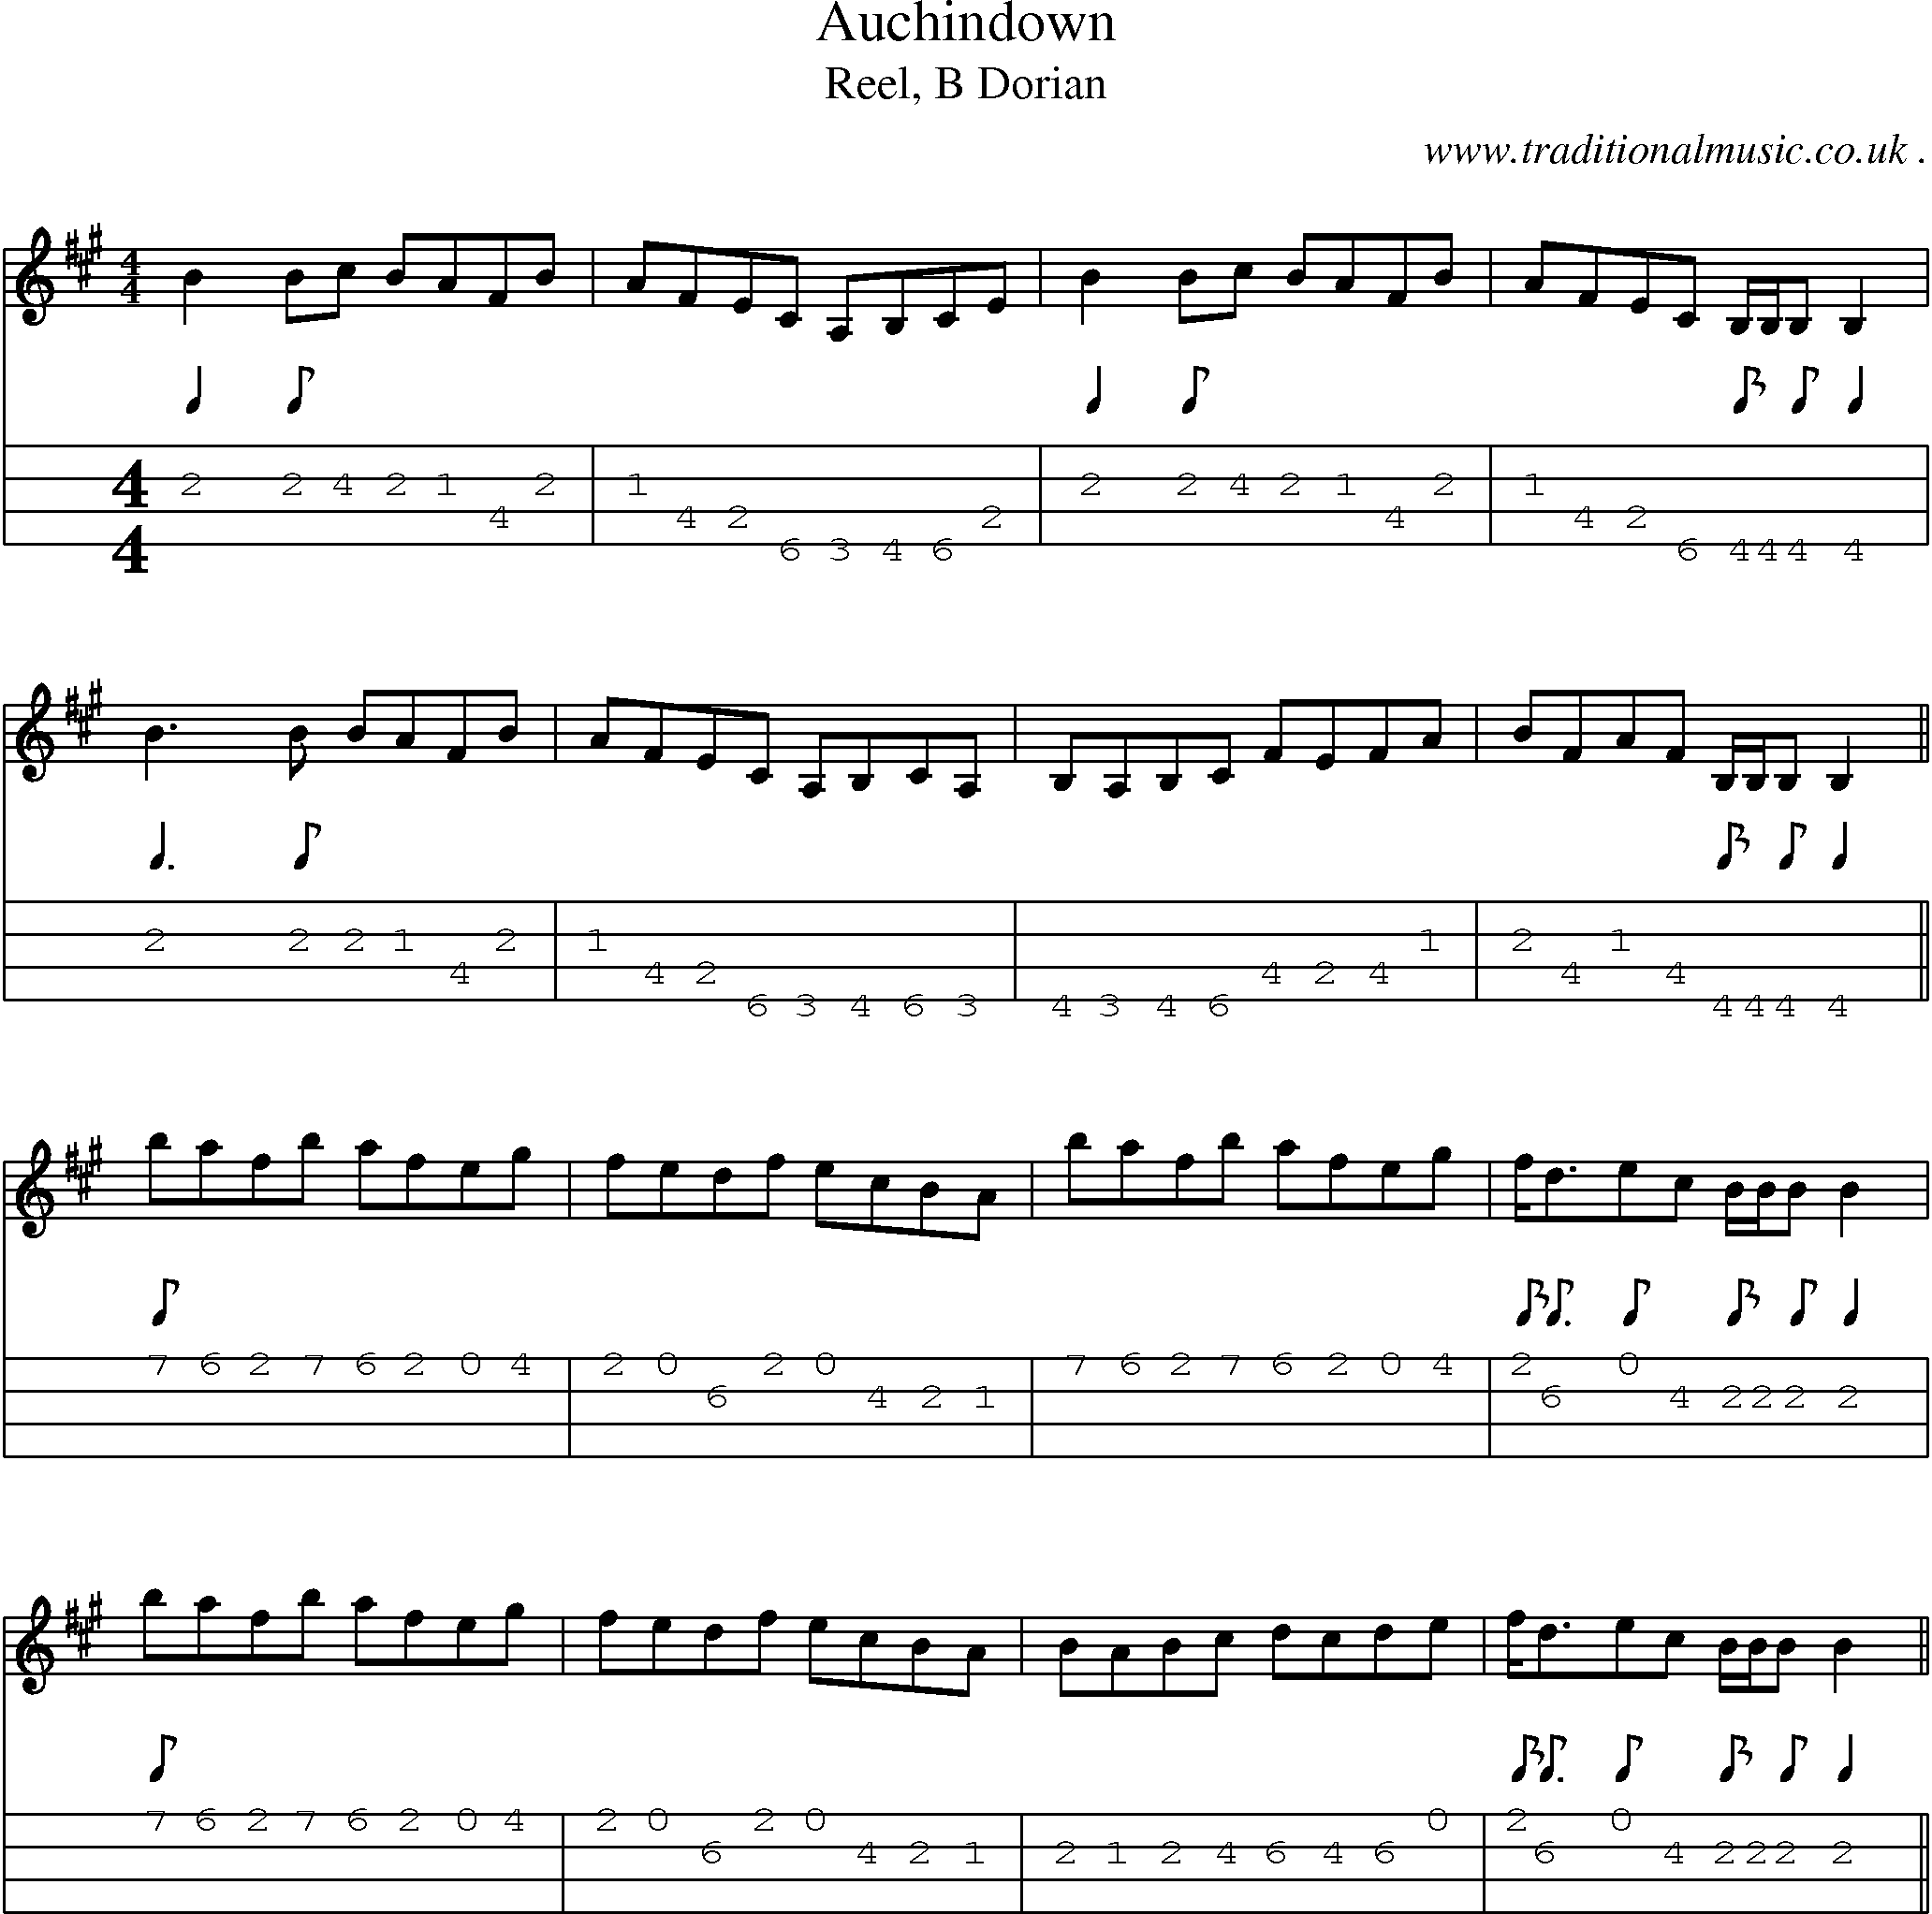 Sheet-music  score, Chords and Mandolin Tabs for Auchindown